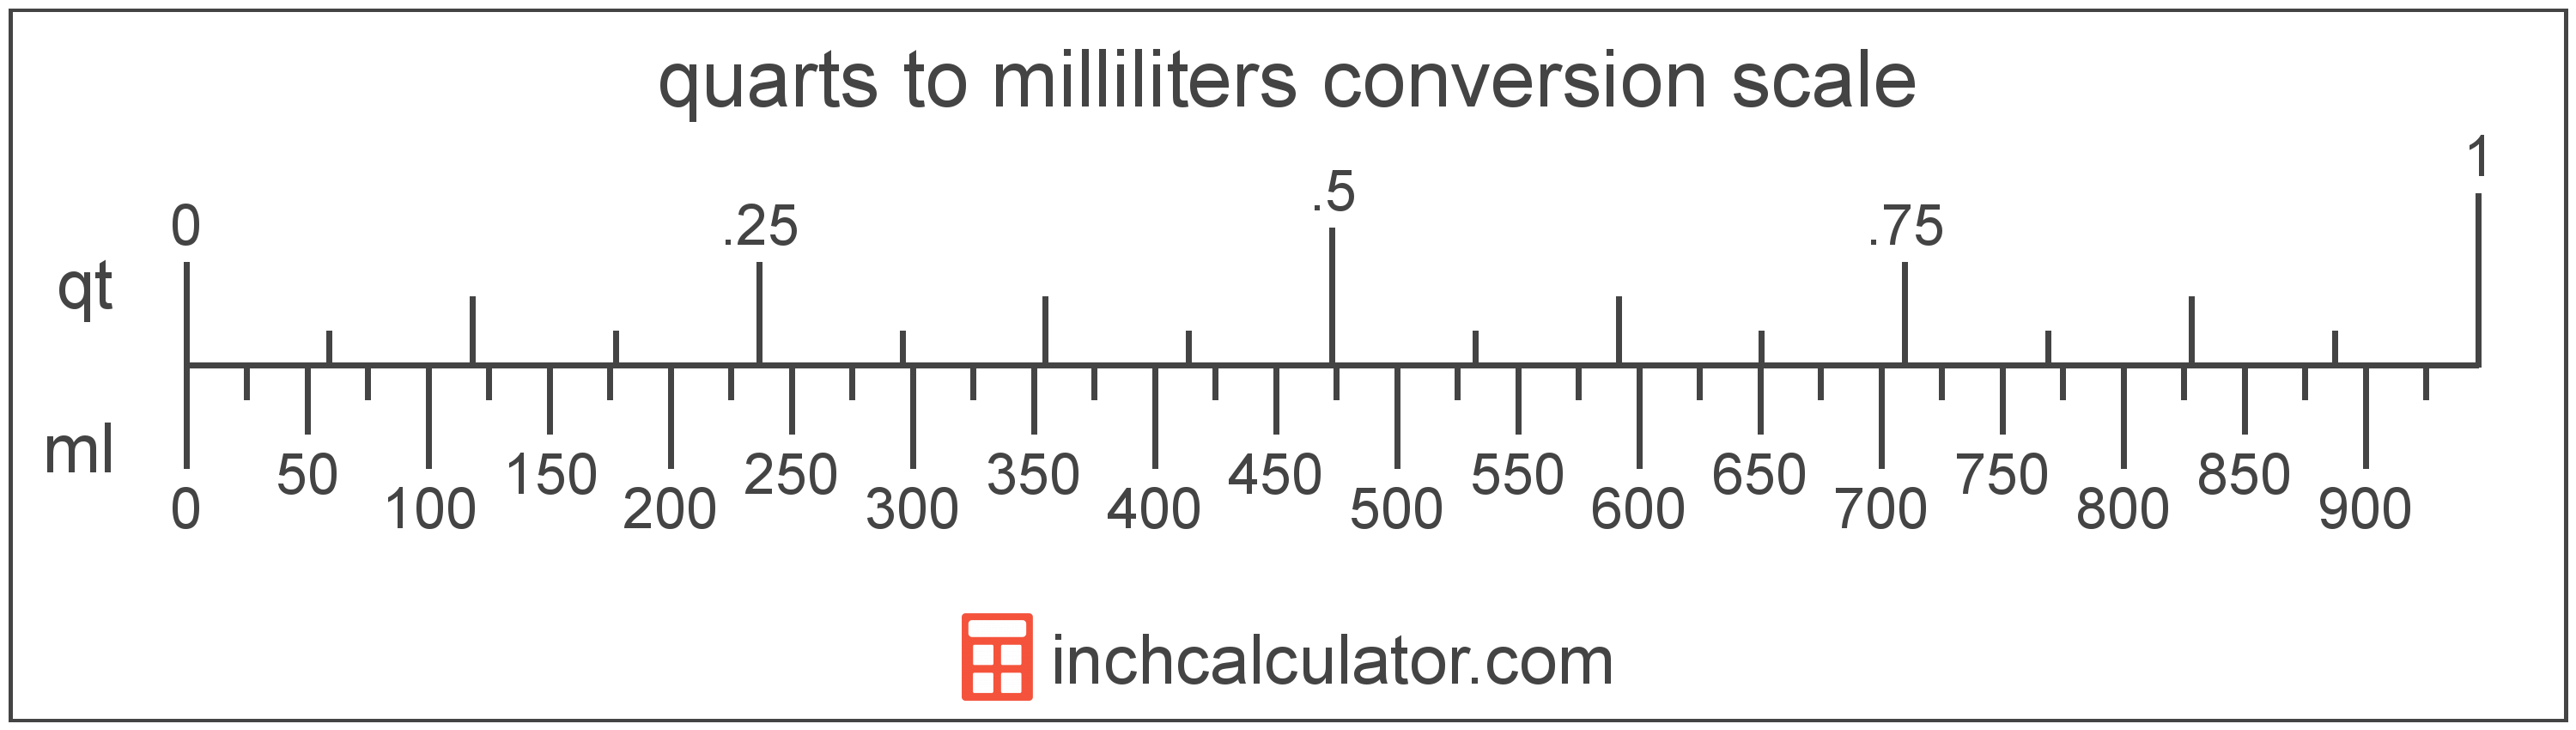 conversion scale showing quarts and equivalent milliliters volume values